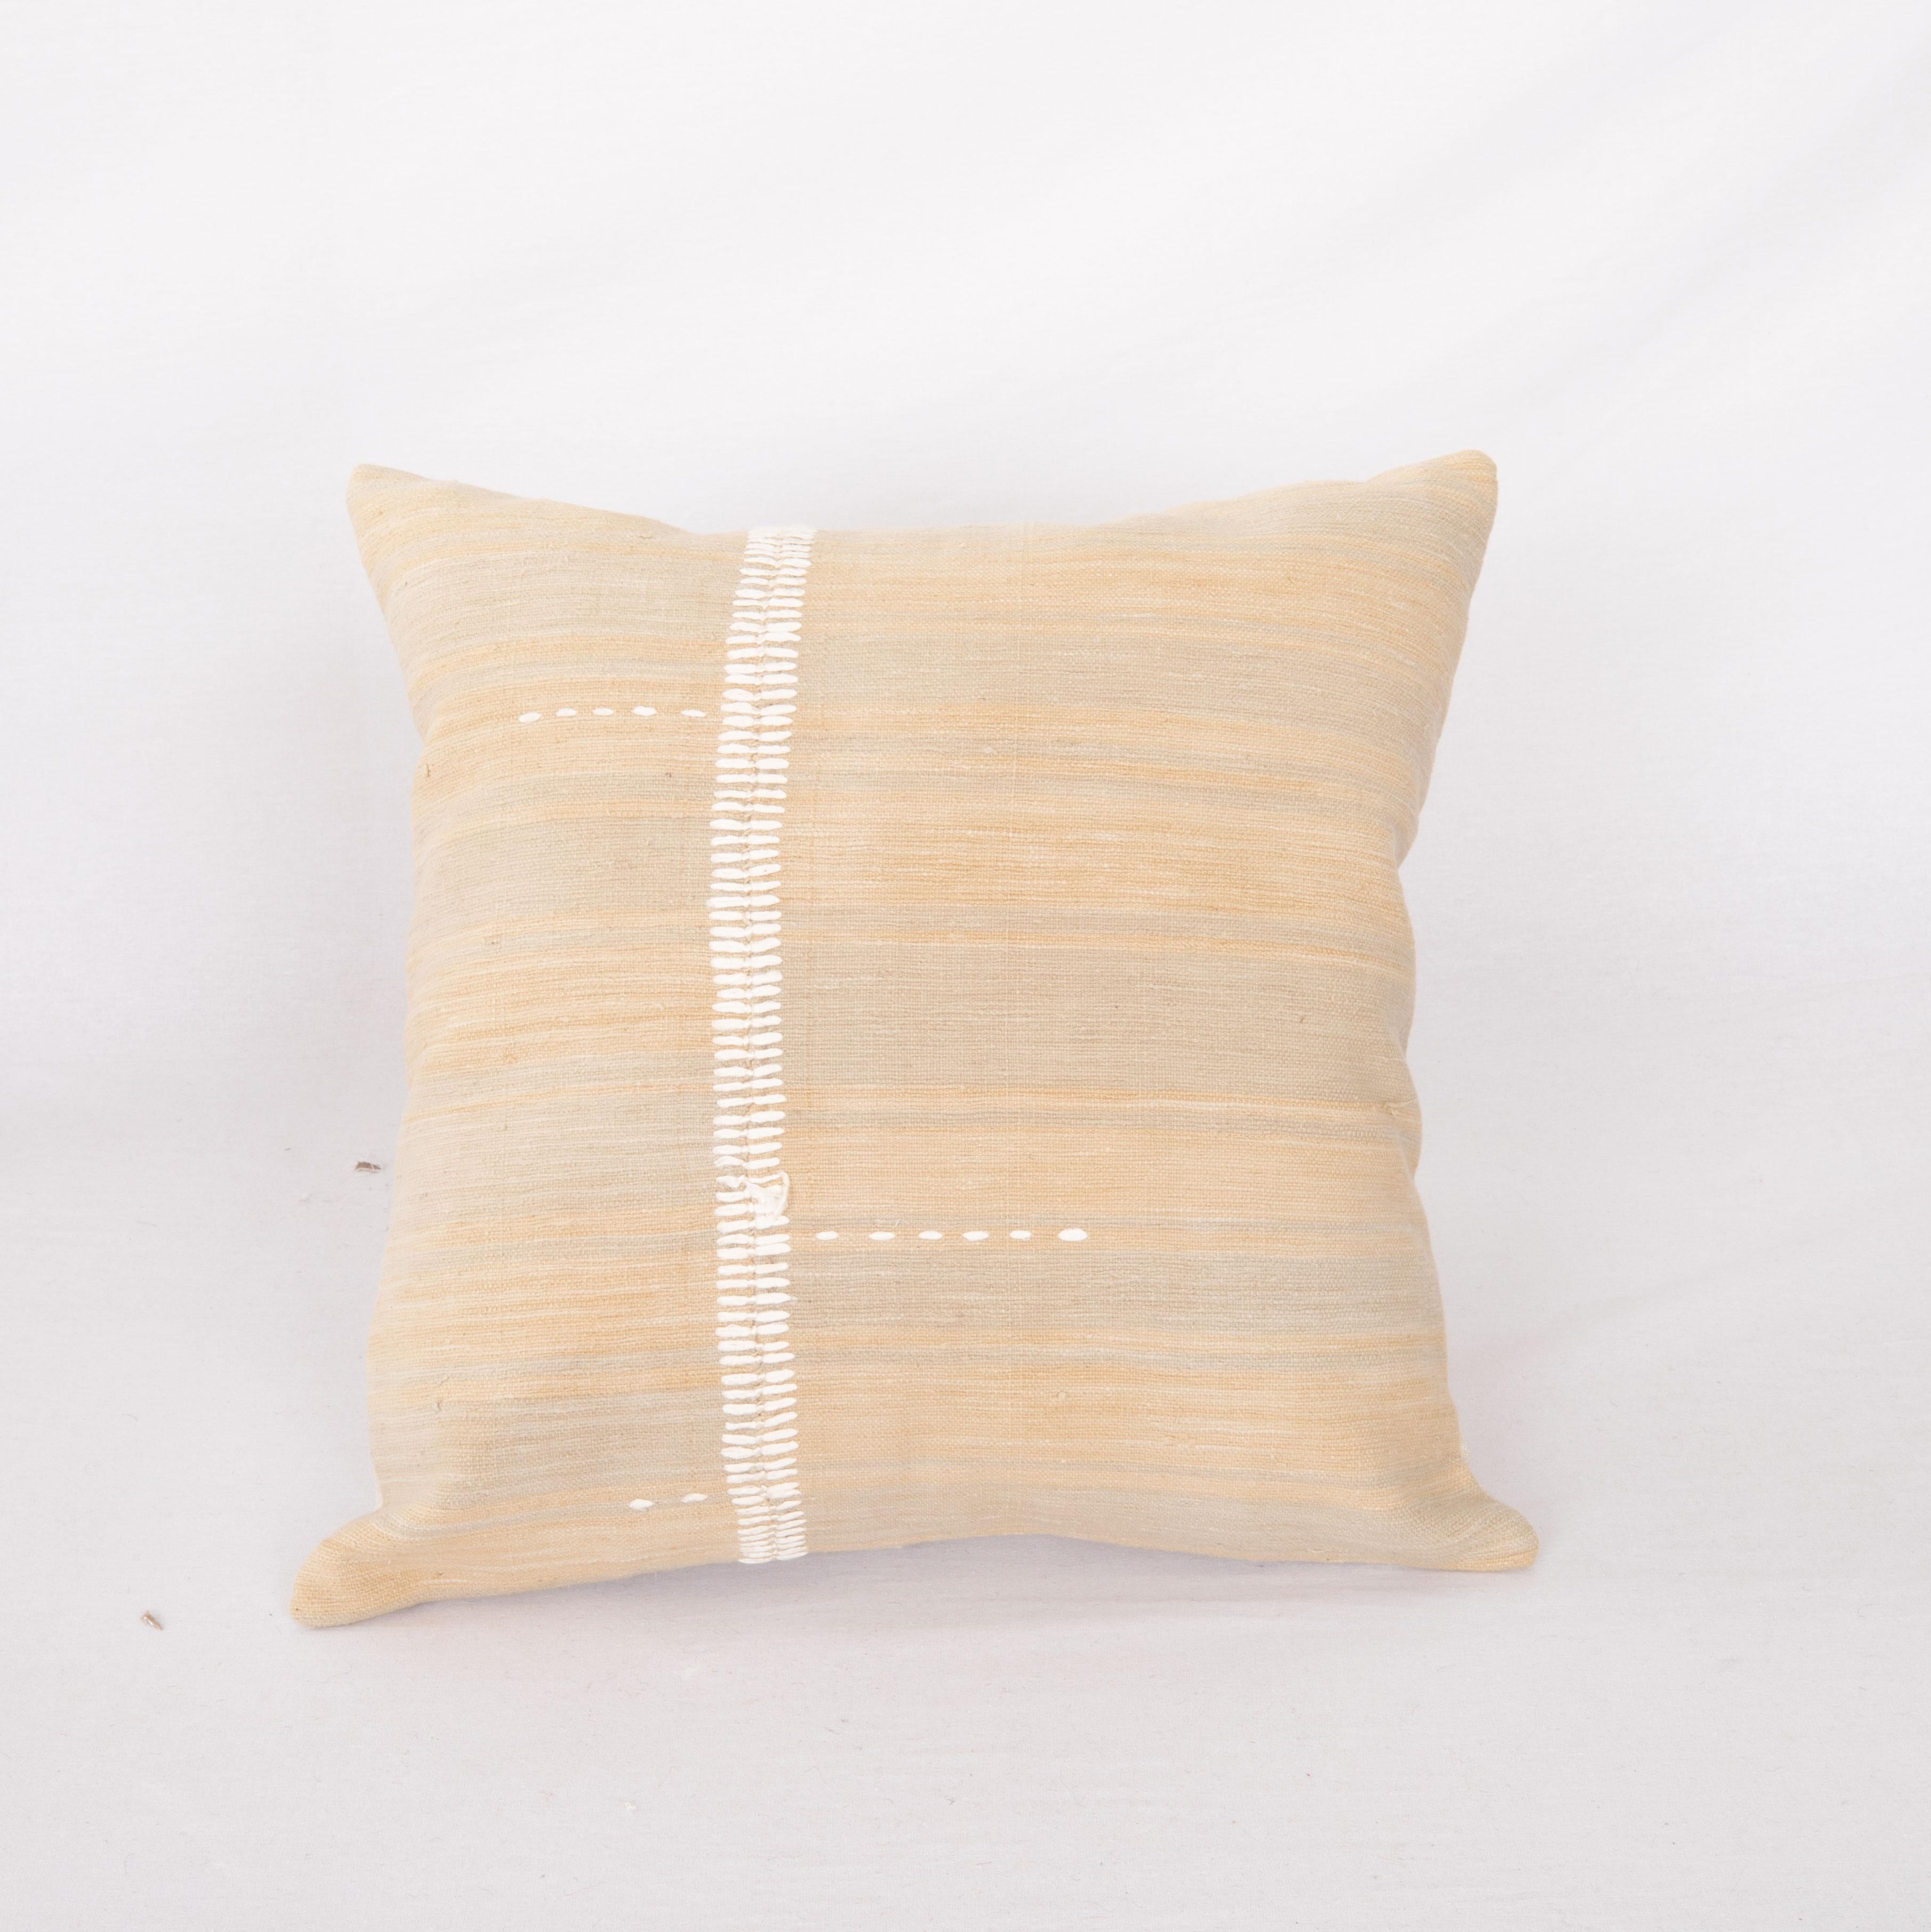 This pillow case is made from a vintage Anatolian Cotton Cover. Hand done silk stitching on it is our addition to the piece to give it a fine detail.

It does not come with inserts.
linen in the back.
Zipper closure.
Dry cleaning is reccommended
